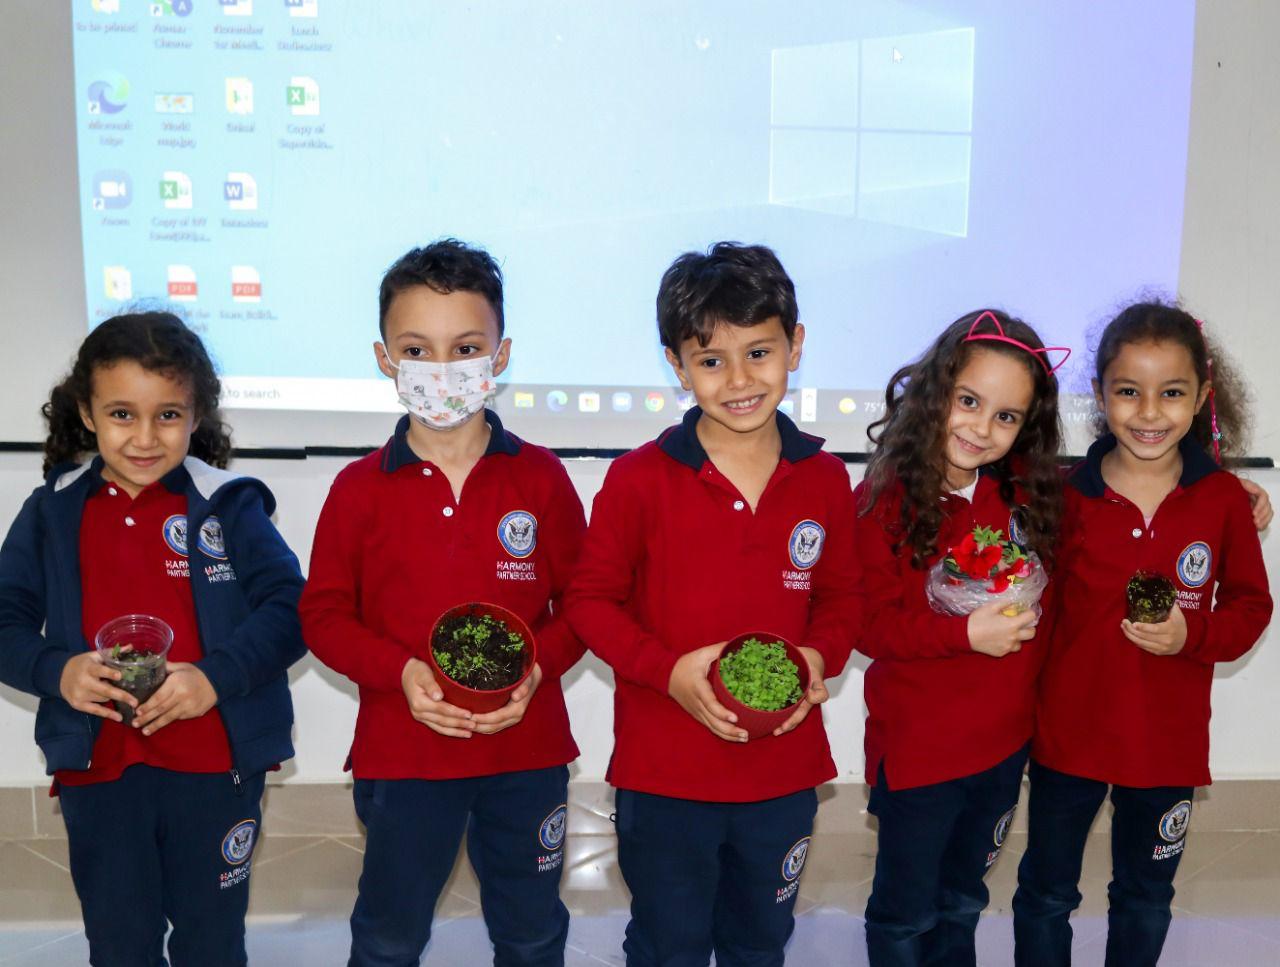 Four students from IVY STEM International School participating in a classroom activity with computers and plants, wearing matching red uniforms and holding small plants.